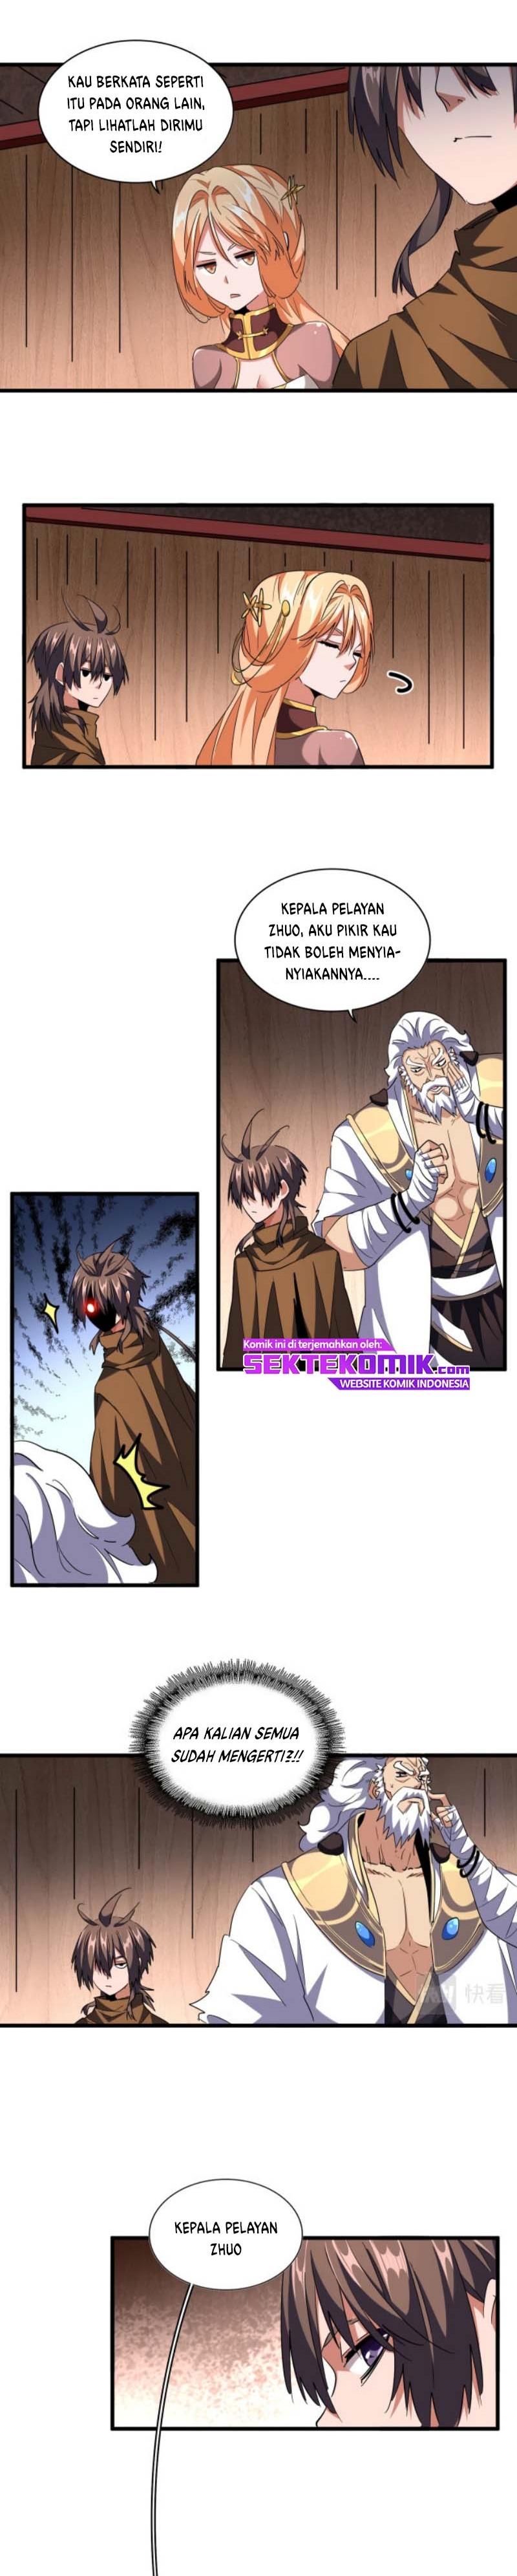 Magic Emperor Chapter 255 Image 4